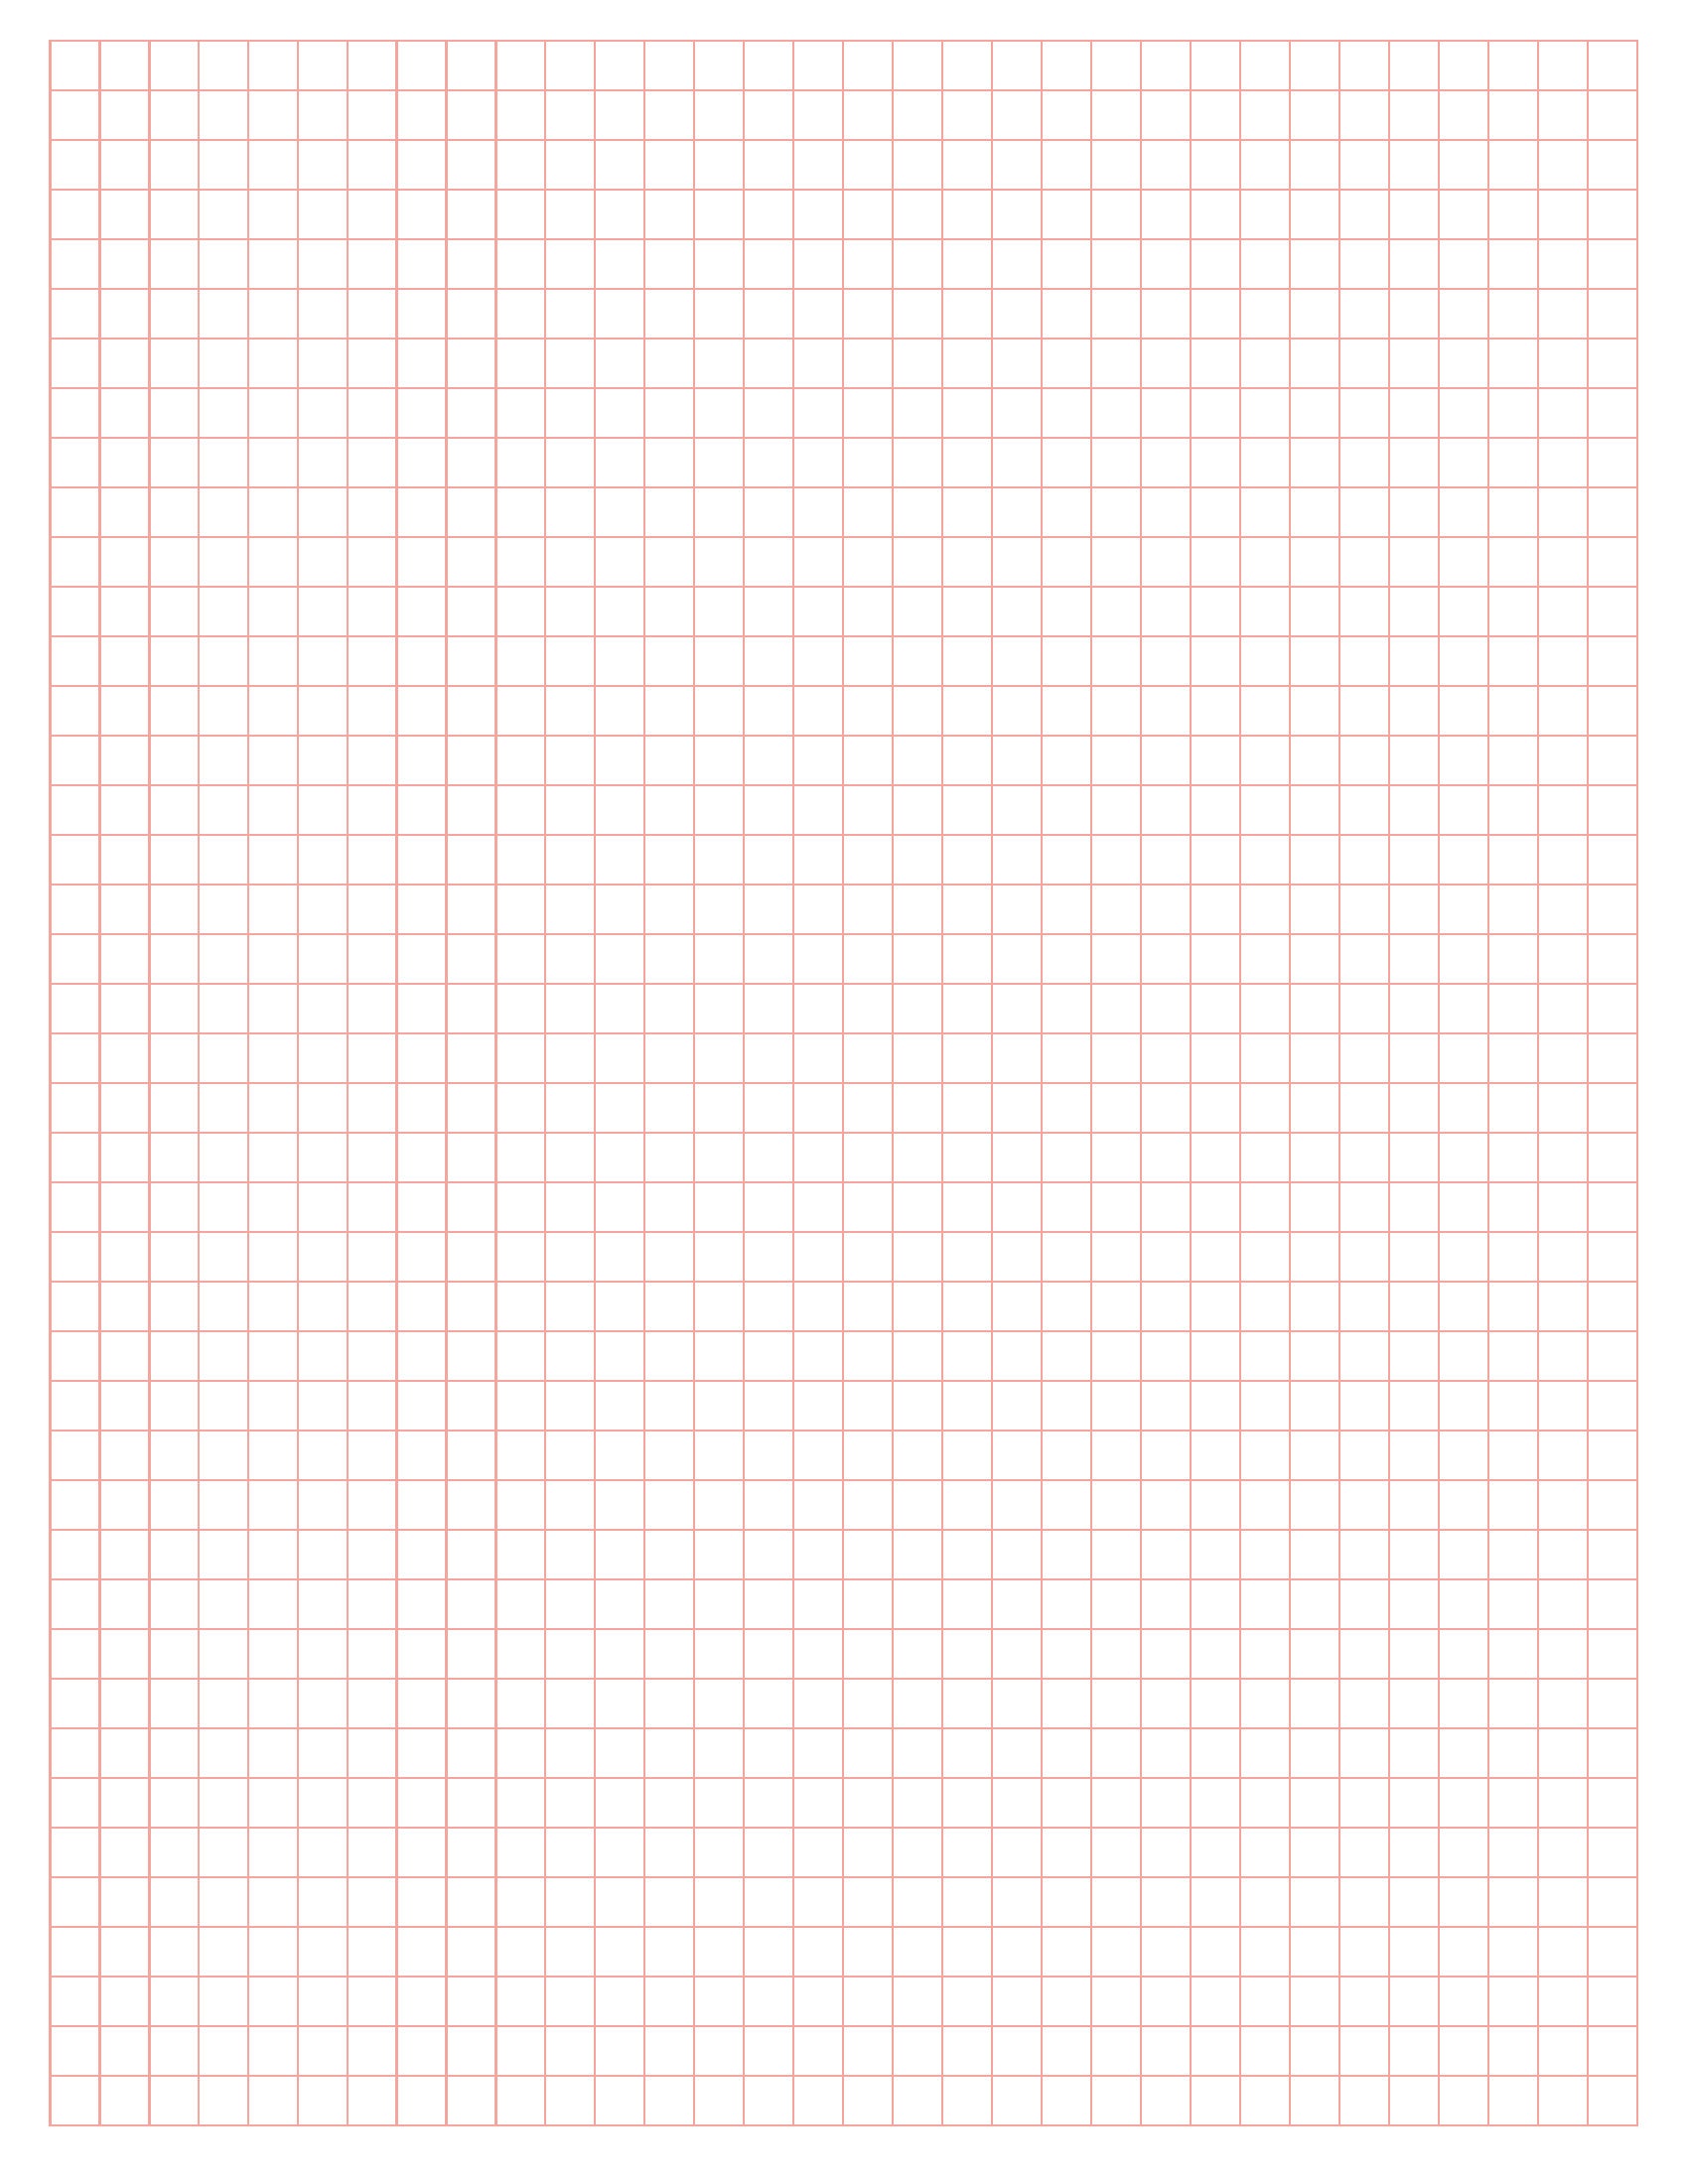 10-1-inch-graph-papers-sample-templates-free-printable-printable-110